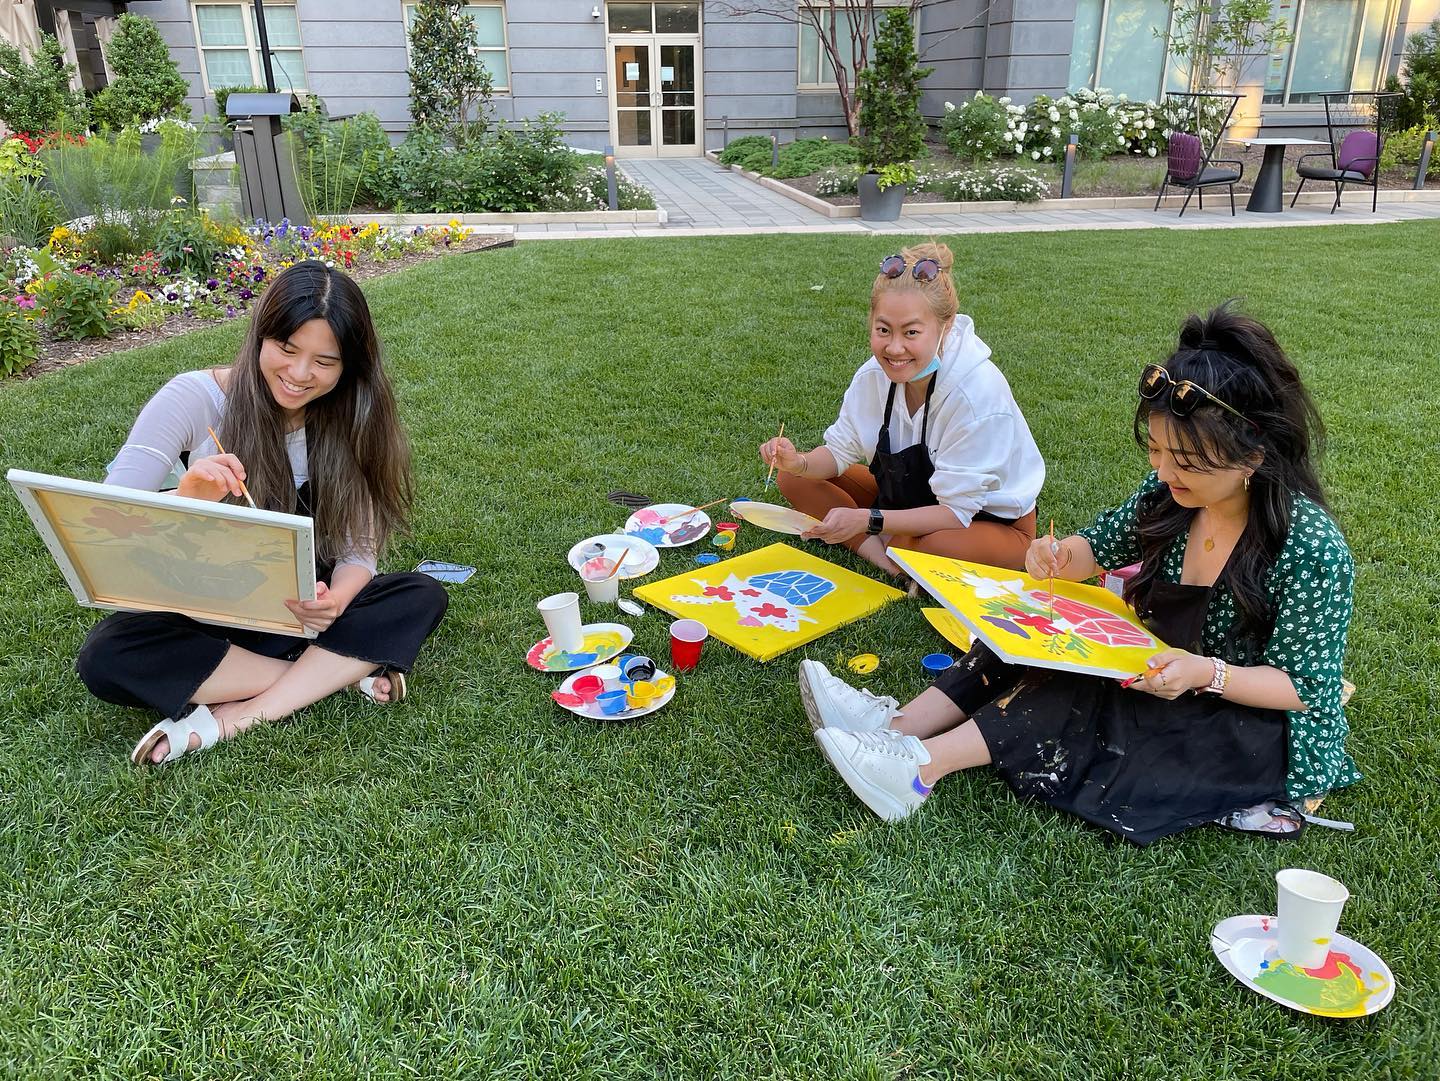 ArtViva Events Painting Class being held outside